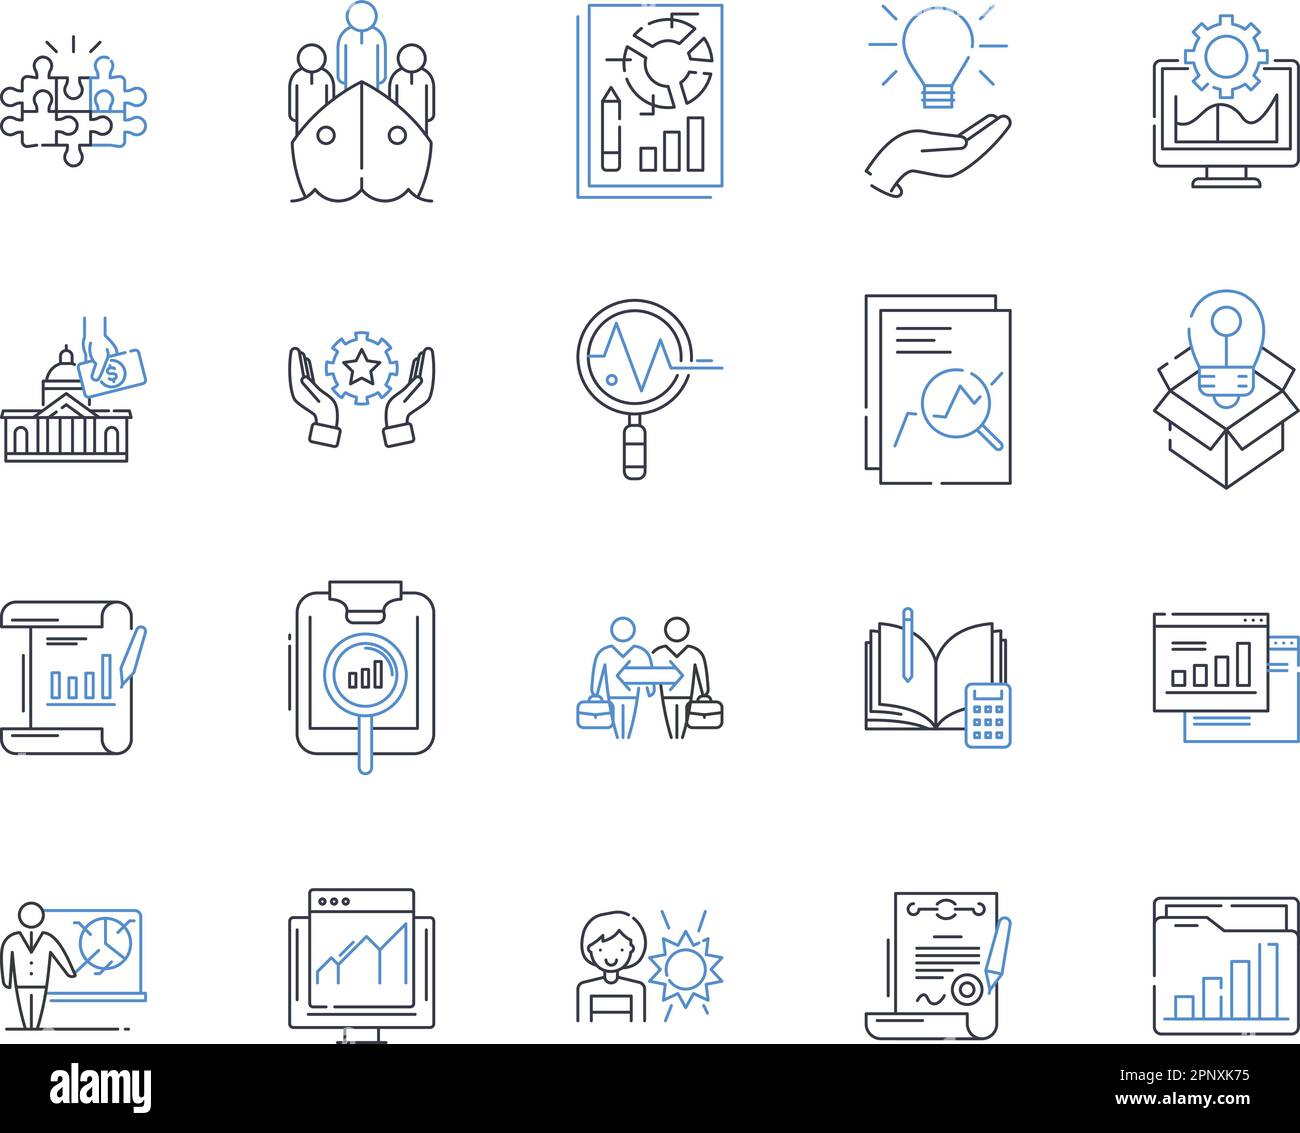 Mapping and charting line icons collection. Cartographer, Atlas, Navigation, Topography, Terrain, Survey, Aerial vector and linear illustration Stock Vector